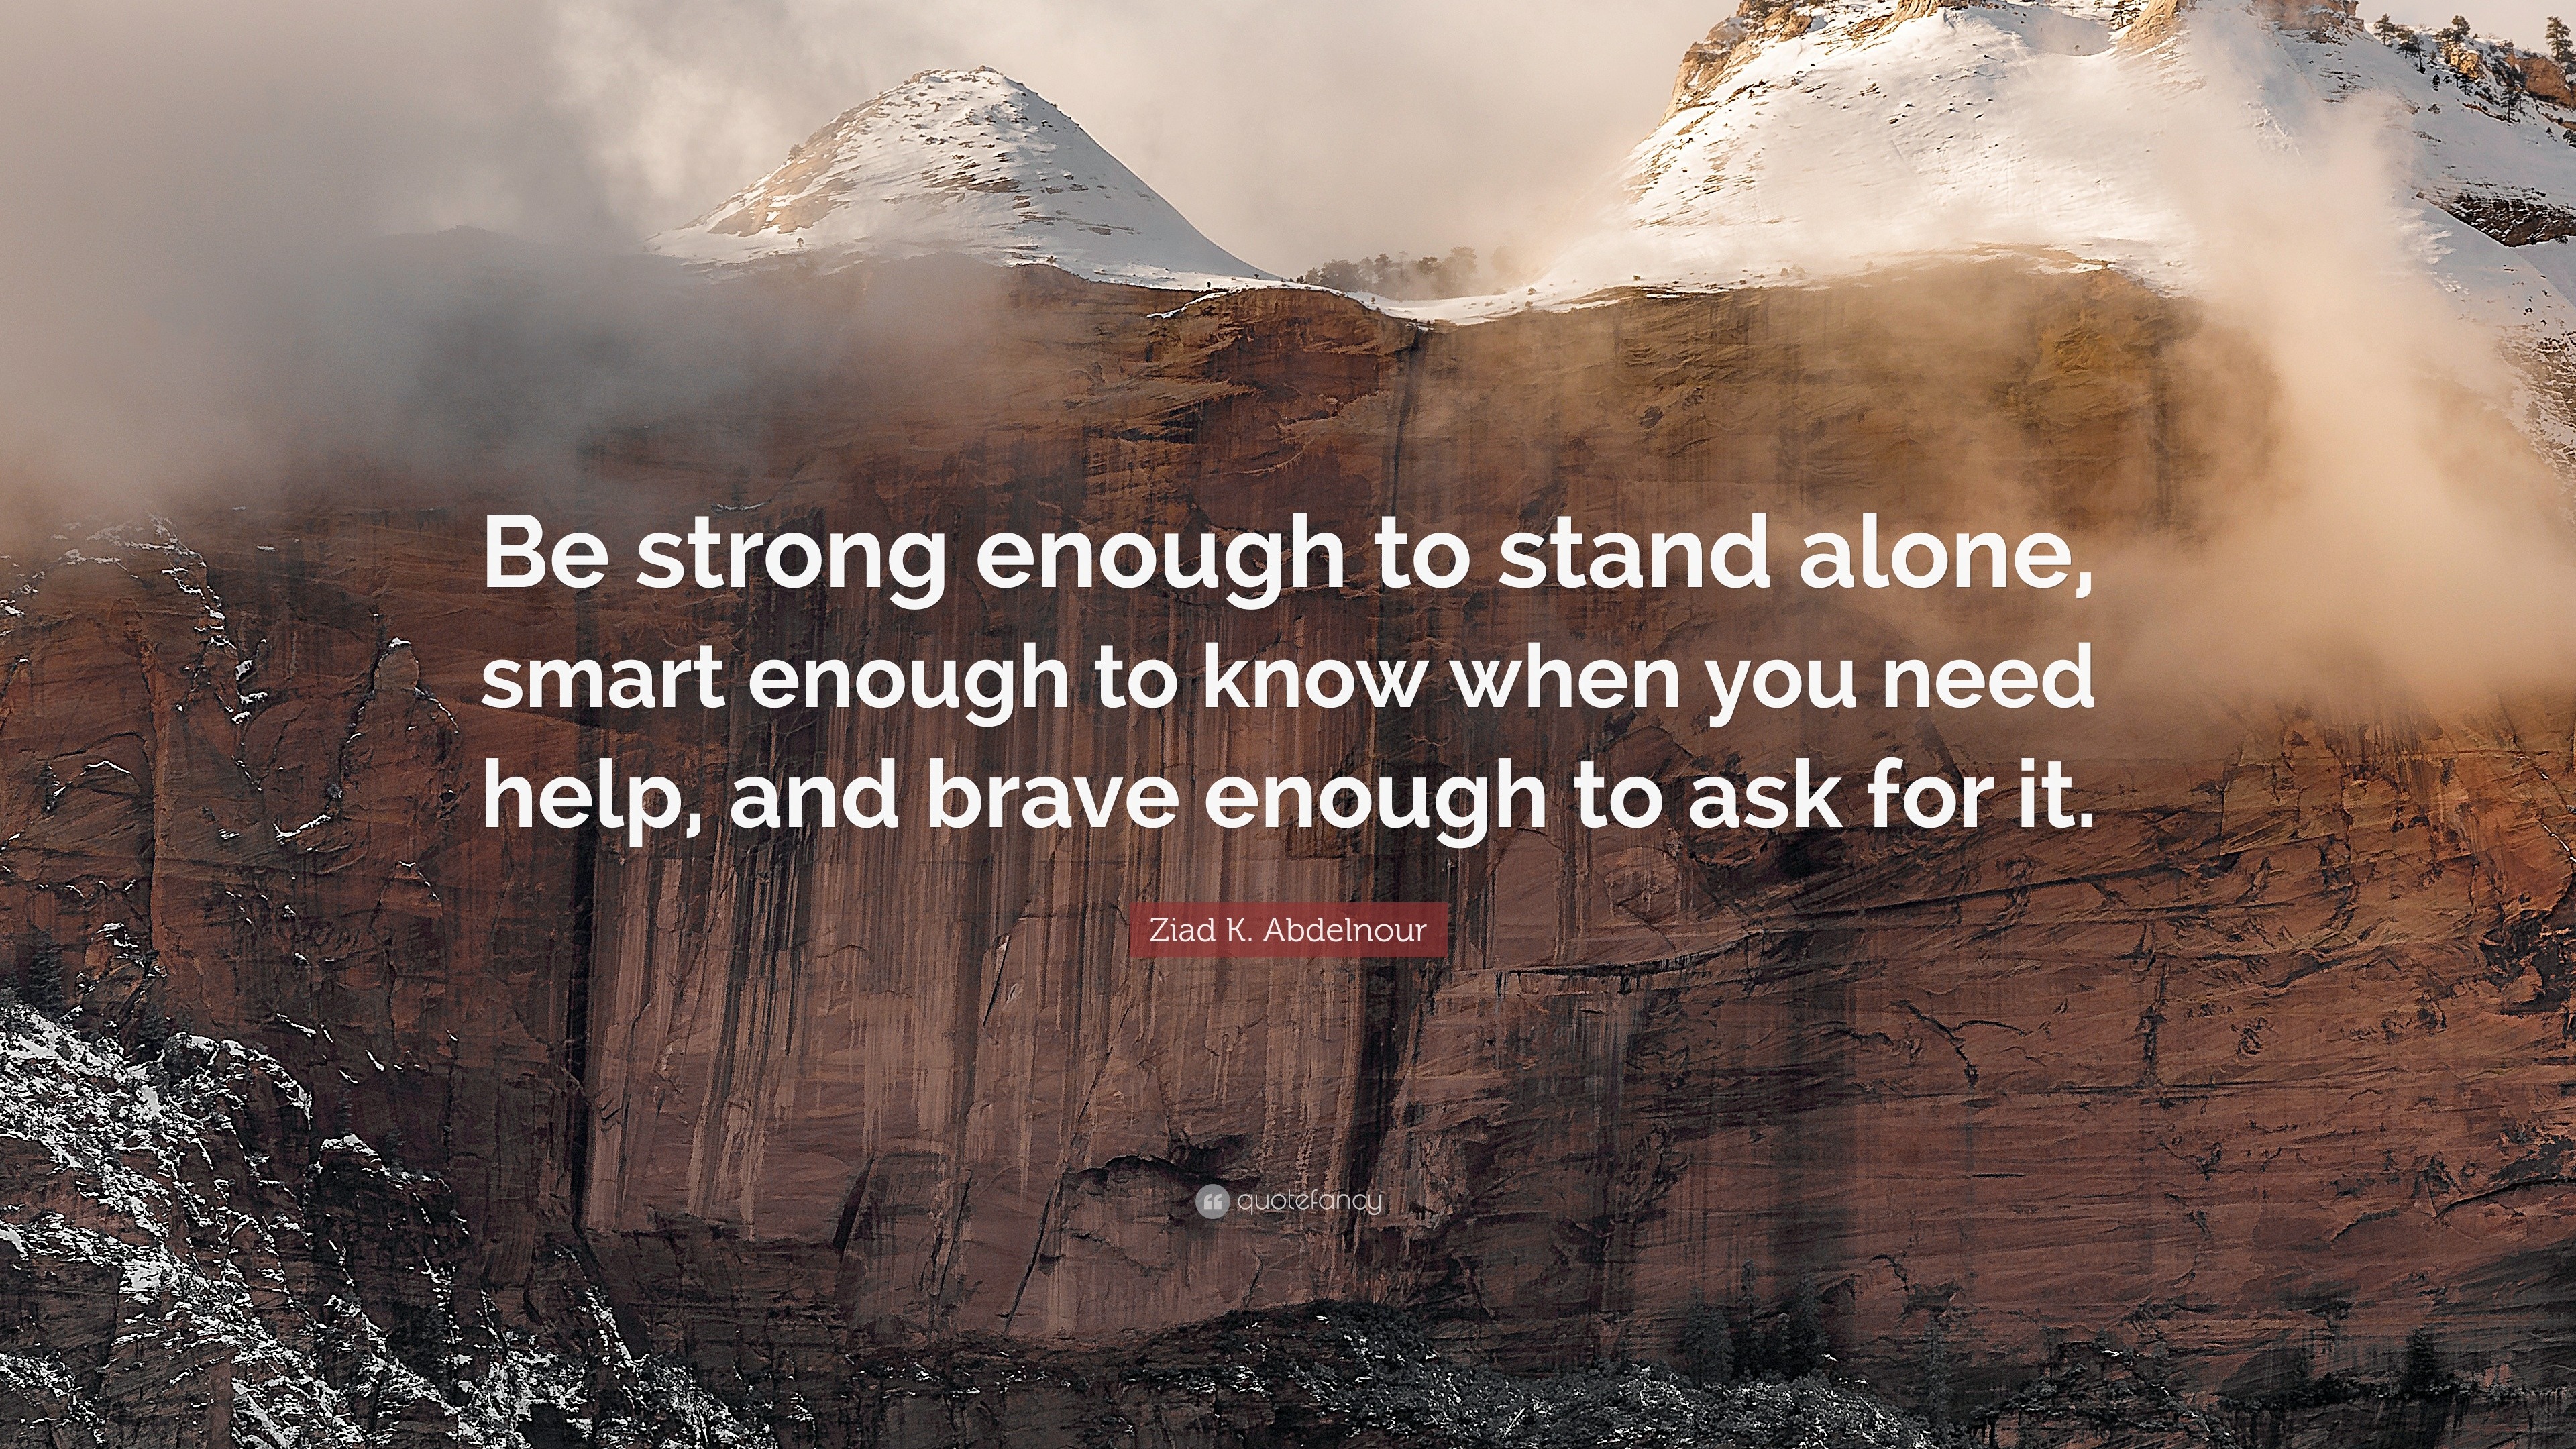 Ziad K Abdelnour Quote Be Strong Enough To Stand Alone Smart Enough To Know When You